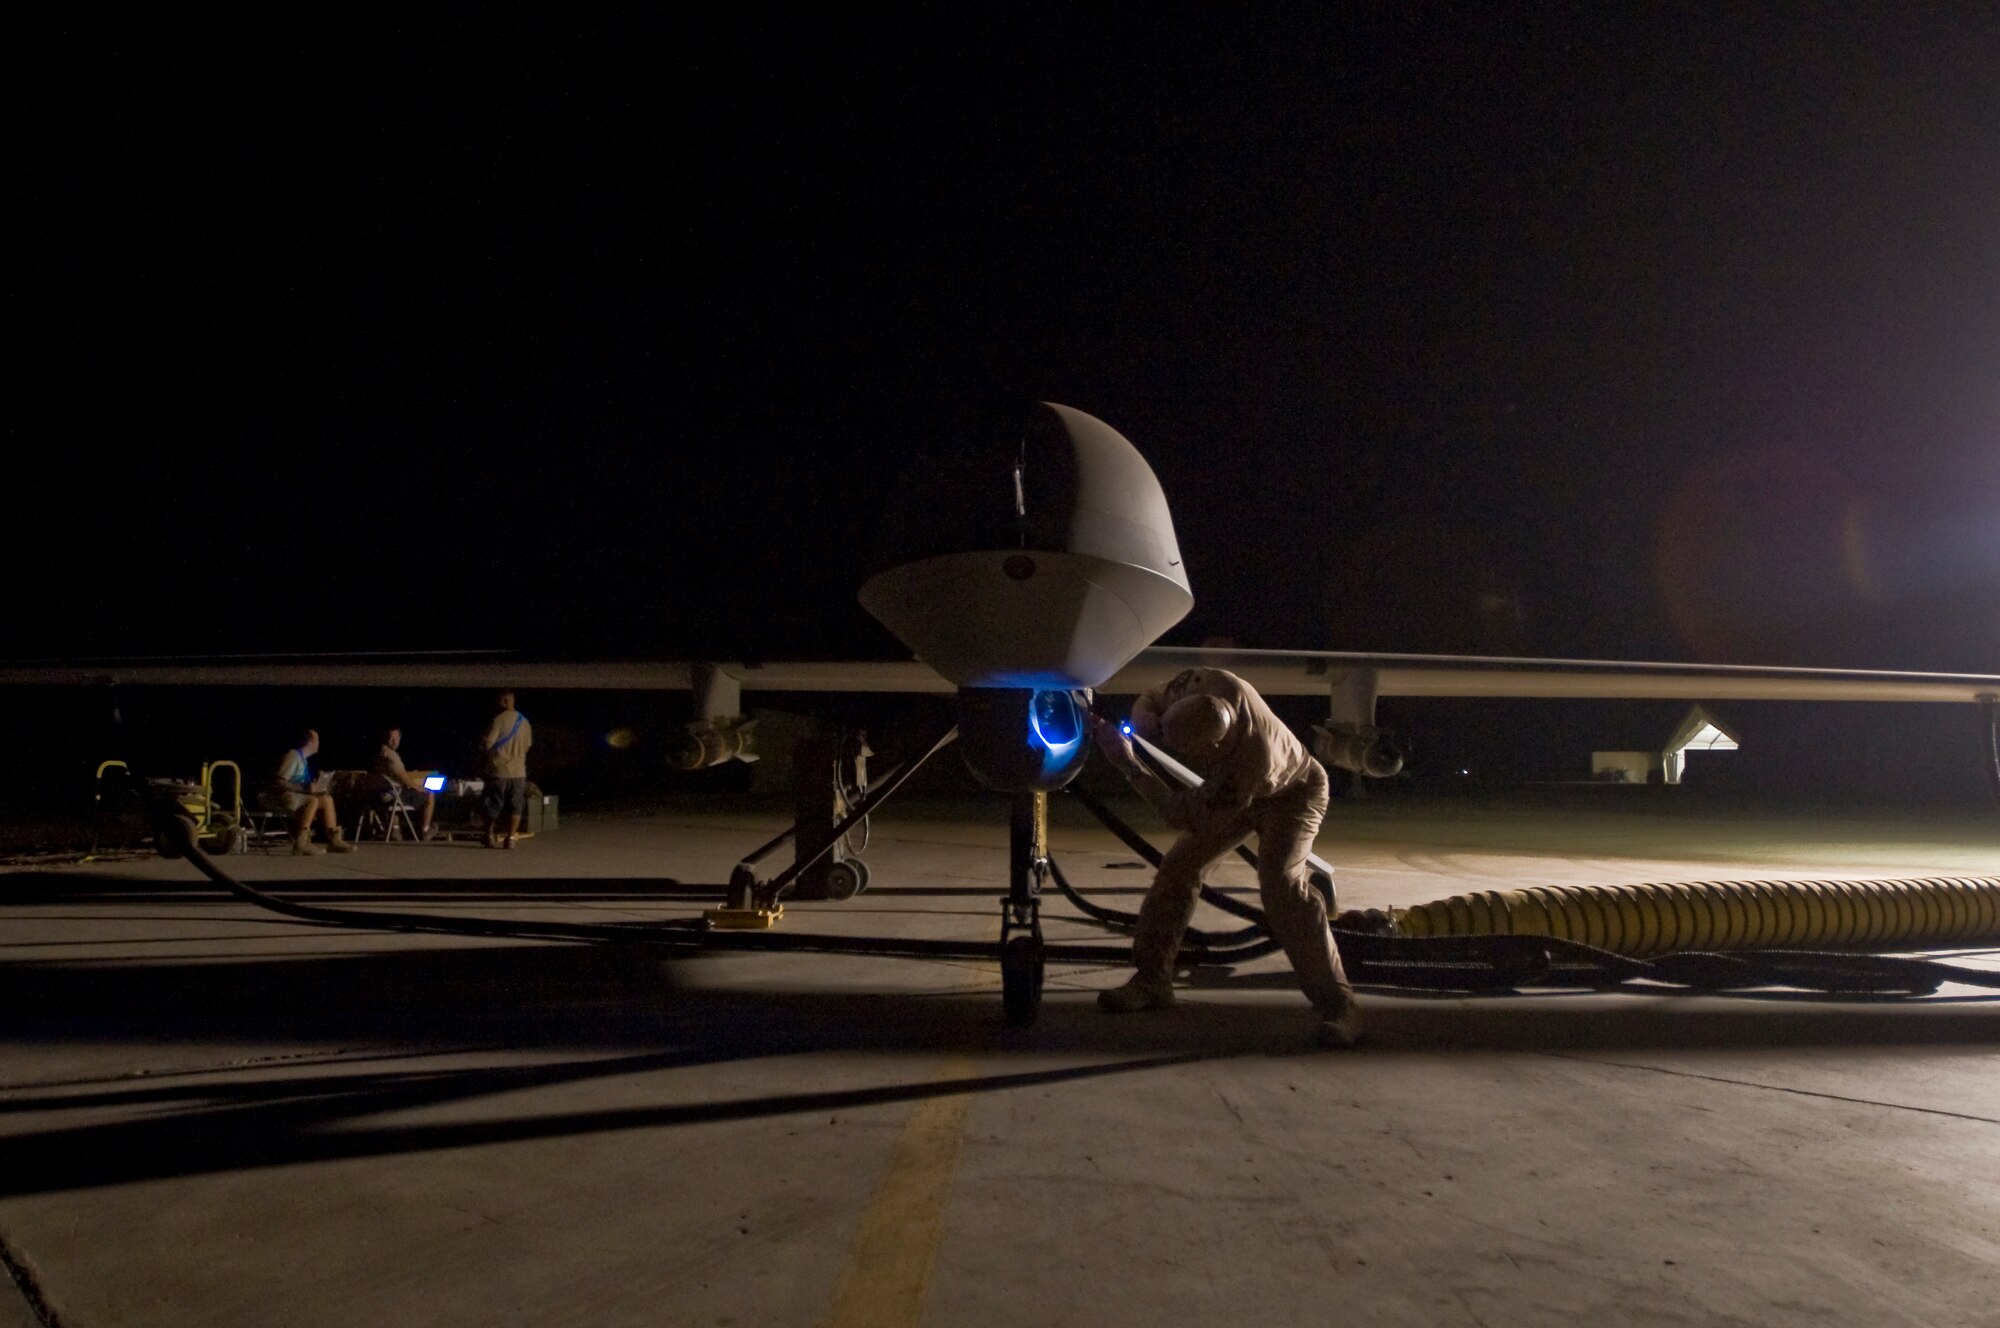 ALI BASE, Iraq -- Lt. Col. Geoffrey Barnes, Detachment 1 46th Expeditionary Reconnaissance Attack Squadron commander, performs a pre-flight inspection of an MQ-1B Predator unmanned aerial system Sept. 3, 2008. The Predator is a medium-altitude, long-endurance, remotely piloted aircraft. Its mission here is to interdict and conduct armed reconnaissance against critical and perishable targets in support of the Global War on Terrorism. Barnes is deployed from Creech Air Force Base, Nev. (U.S. Air Force photo/Airman 1st Class Christopher Griffin)